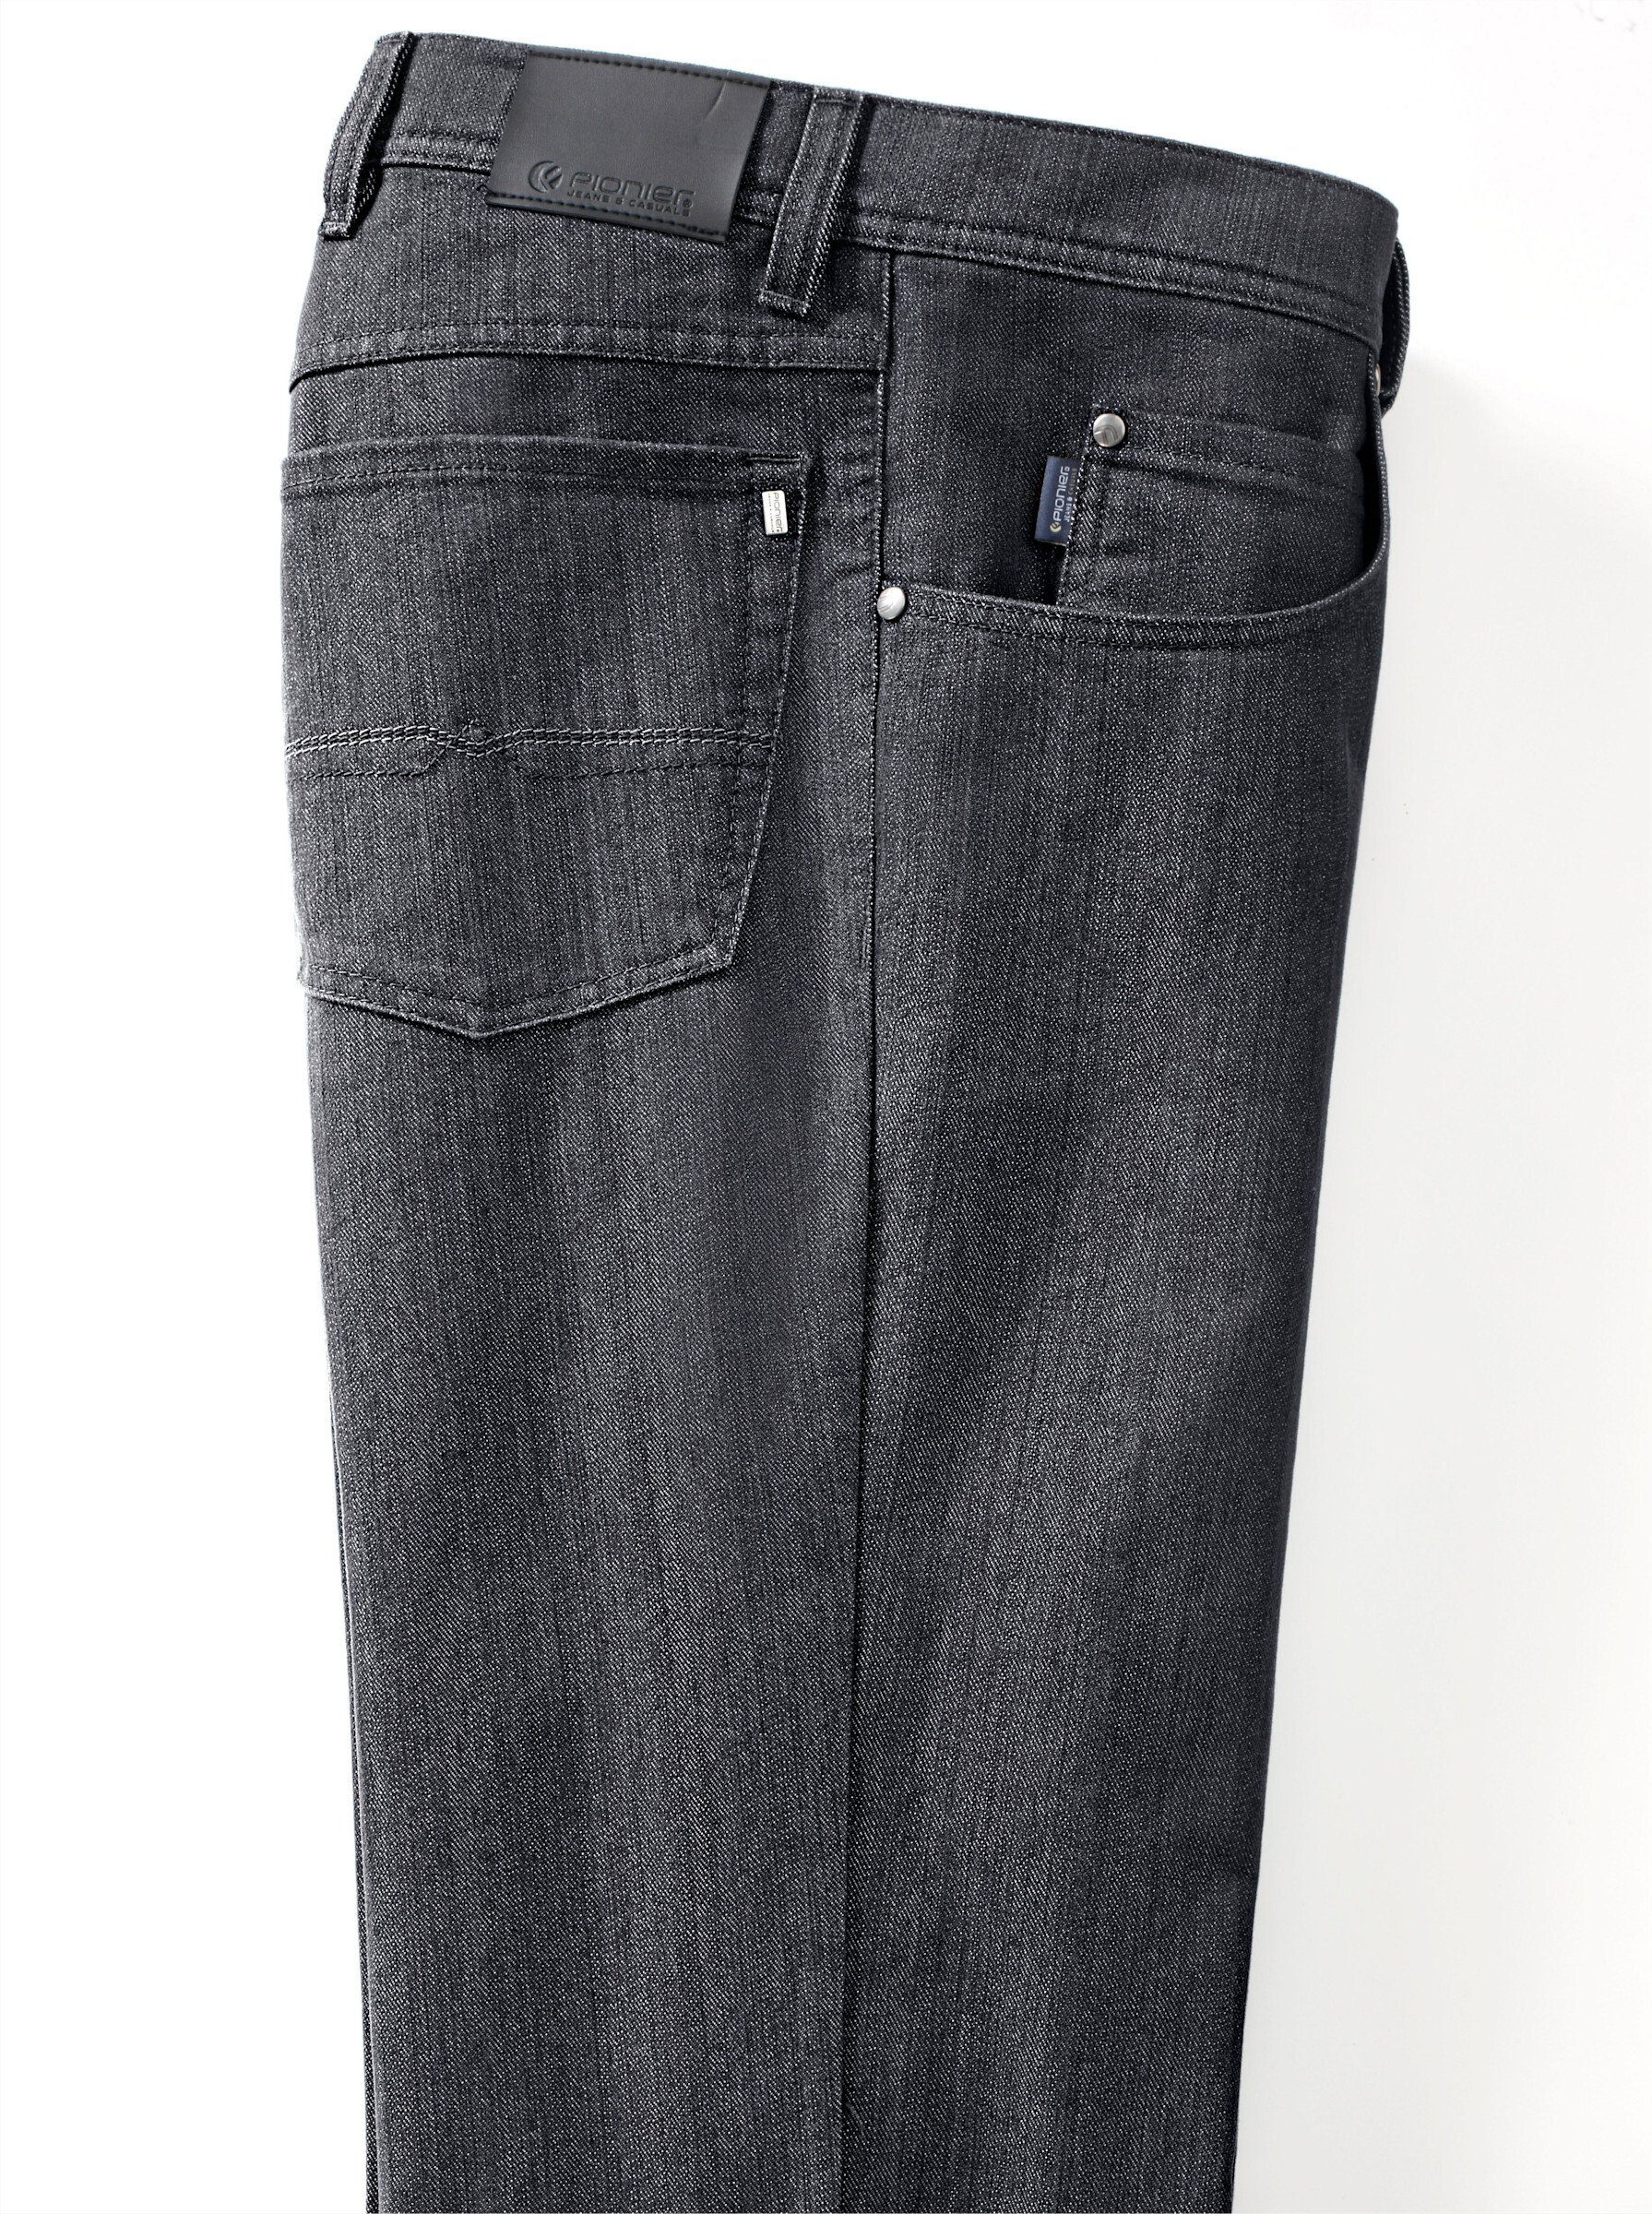 anthrazit Jeans Pioneer Bequeme